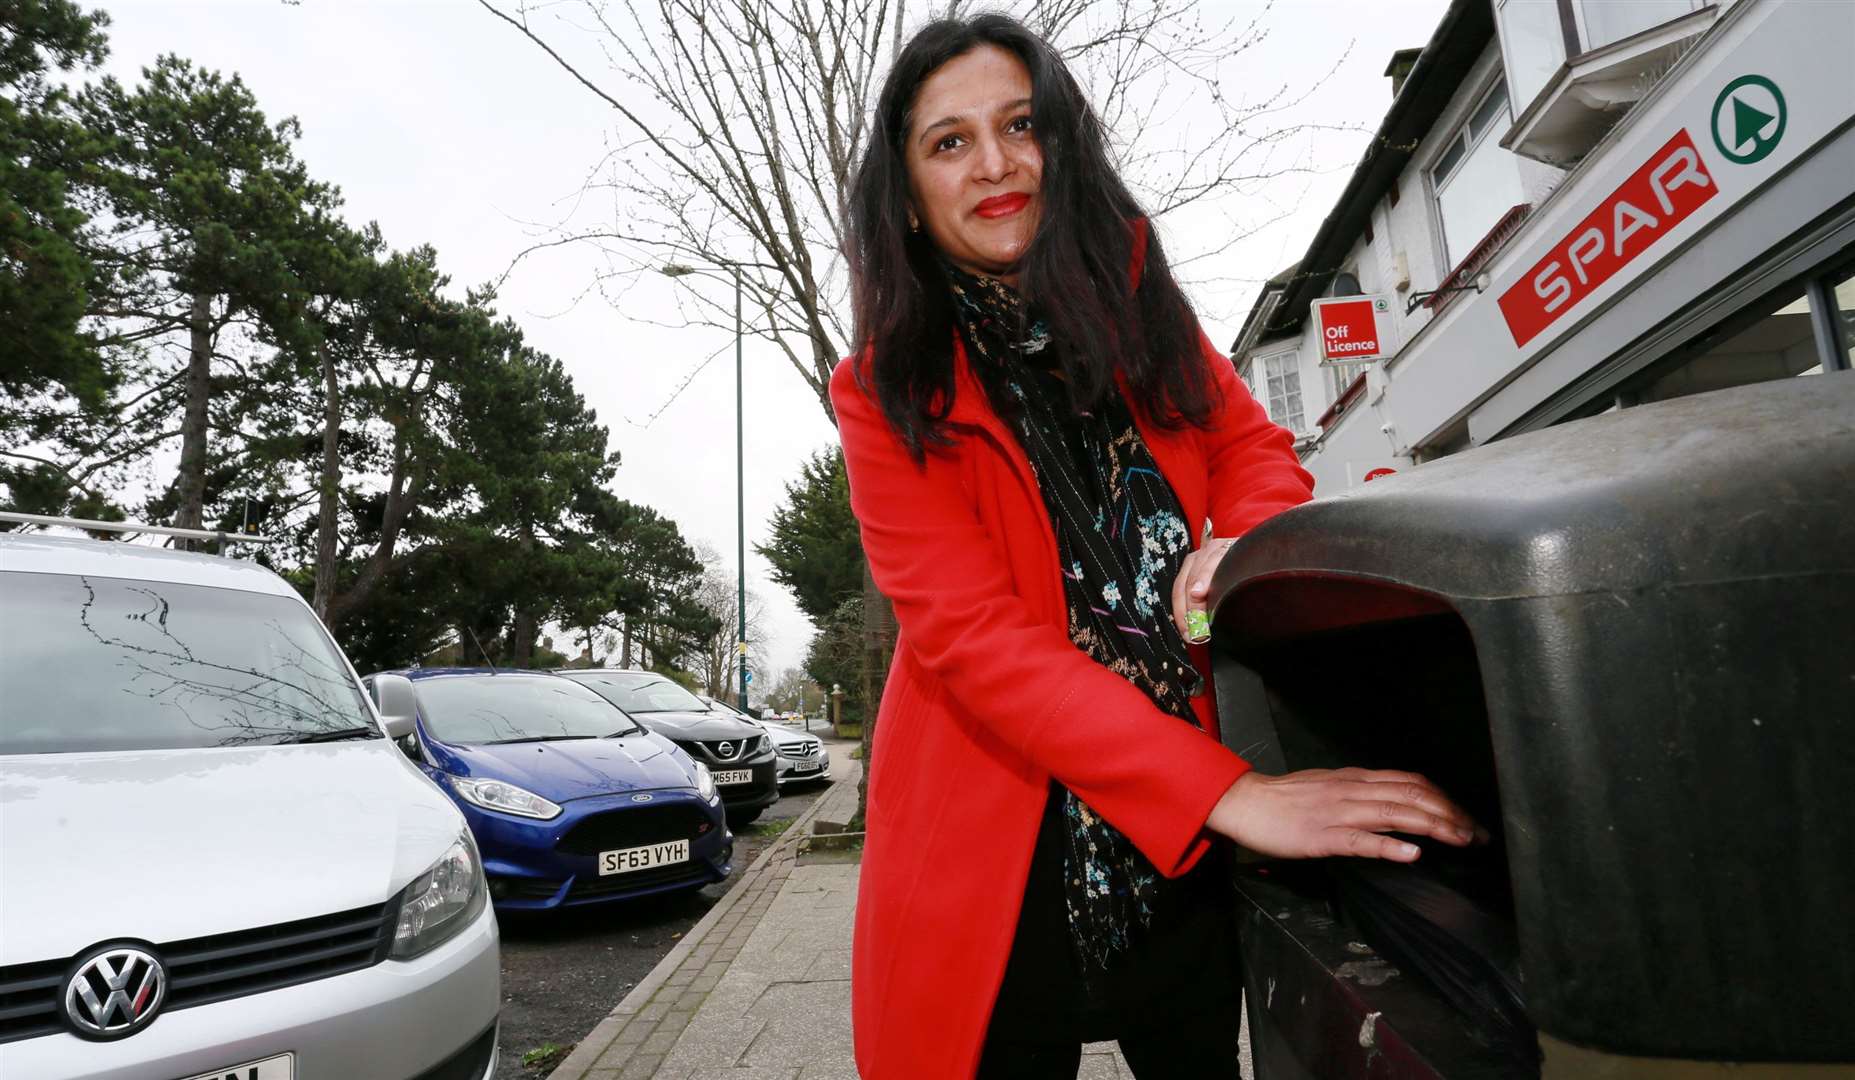 Smitha Campbell witnessed people throwing rubbish out of a car window in Rochester, despite there being a rubbish bin 20 feet across the road. Picture: Phil Lee